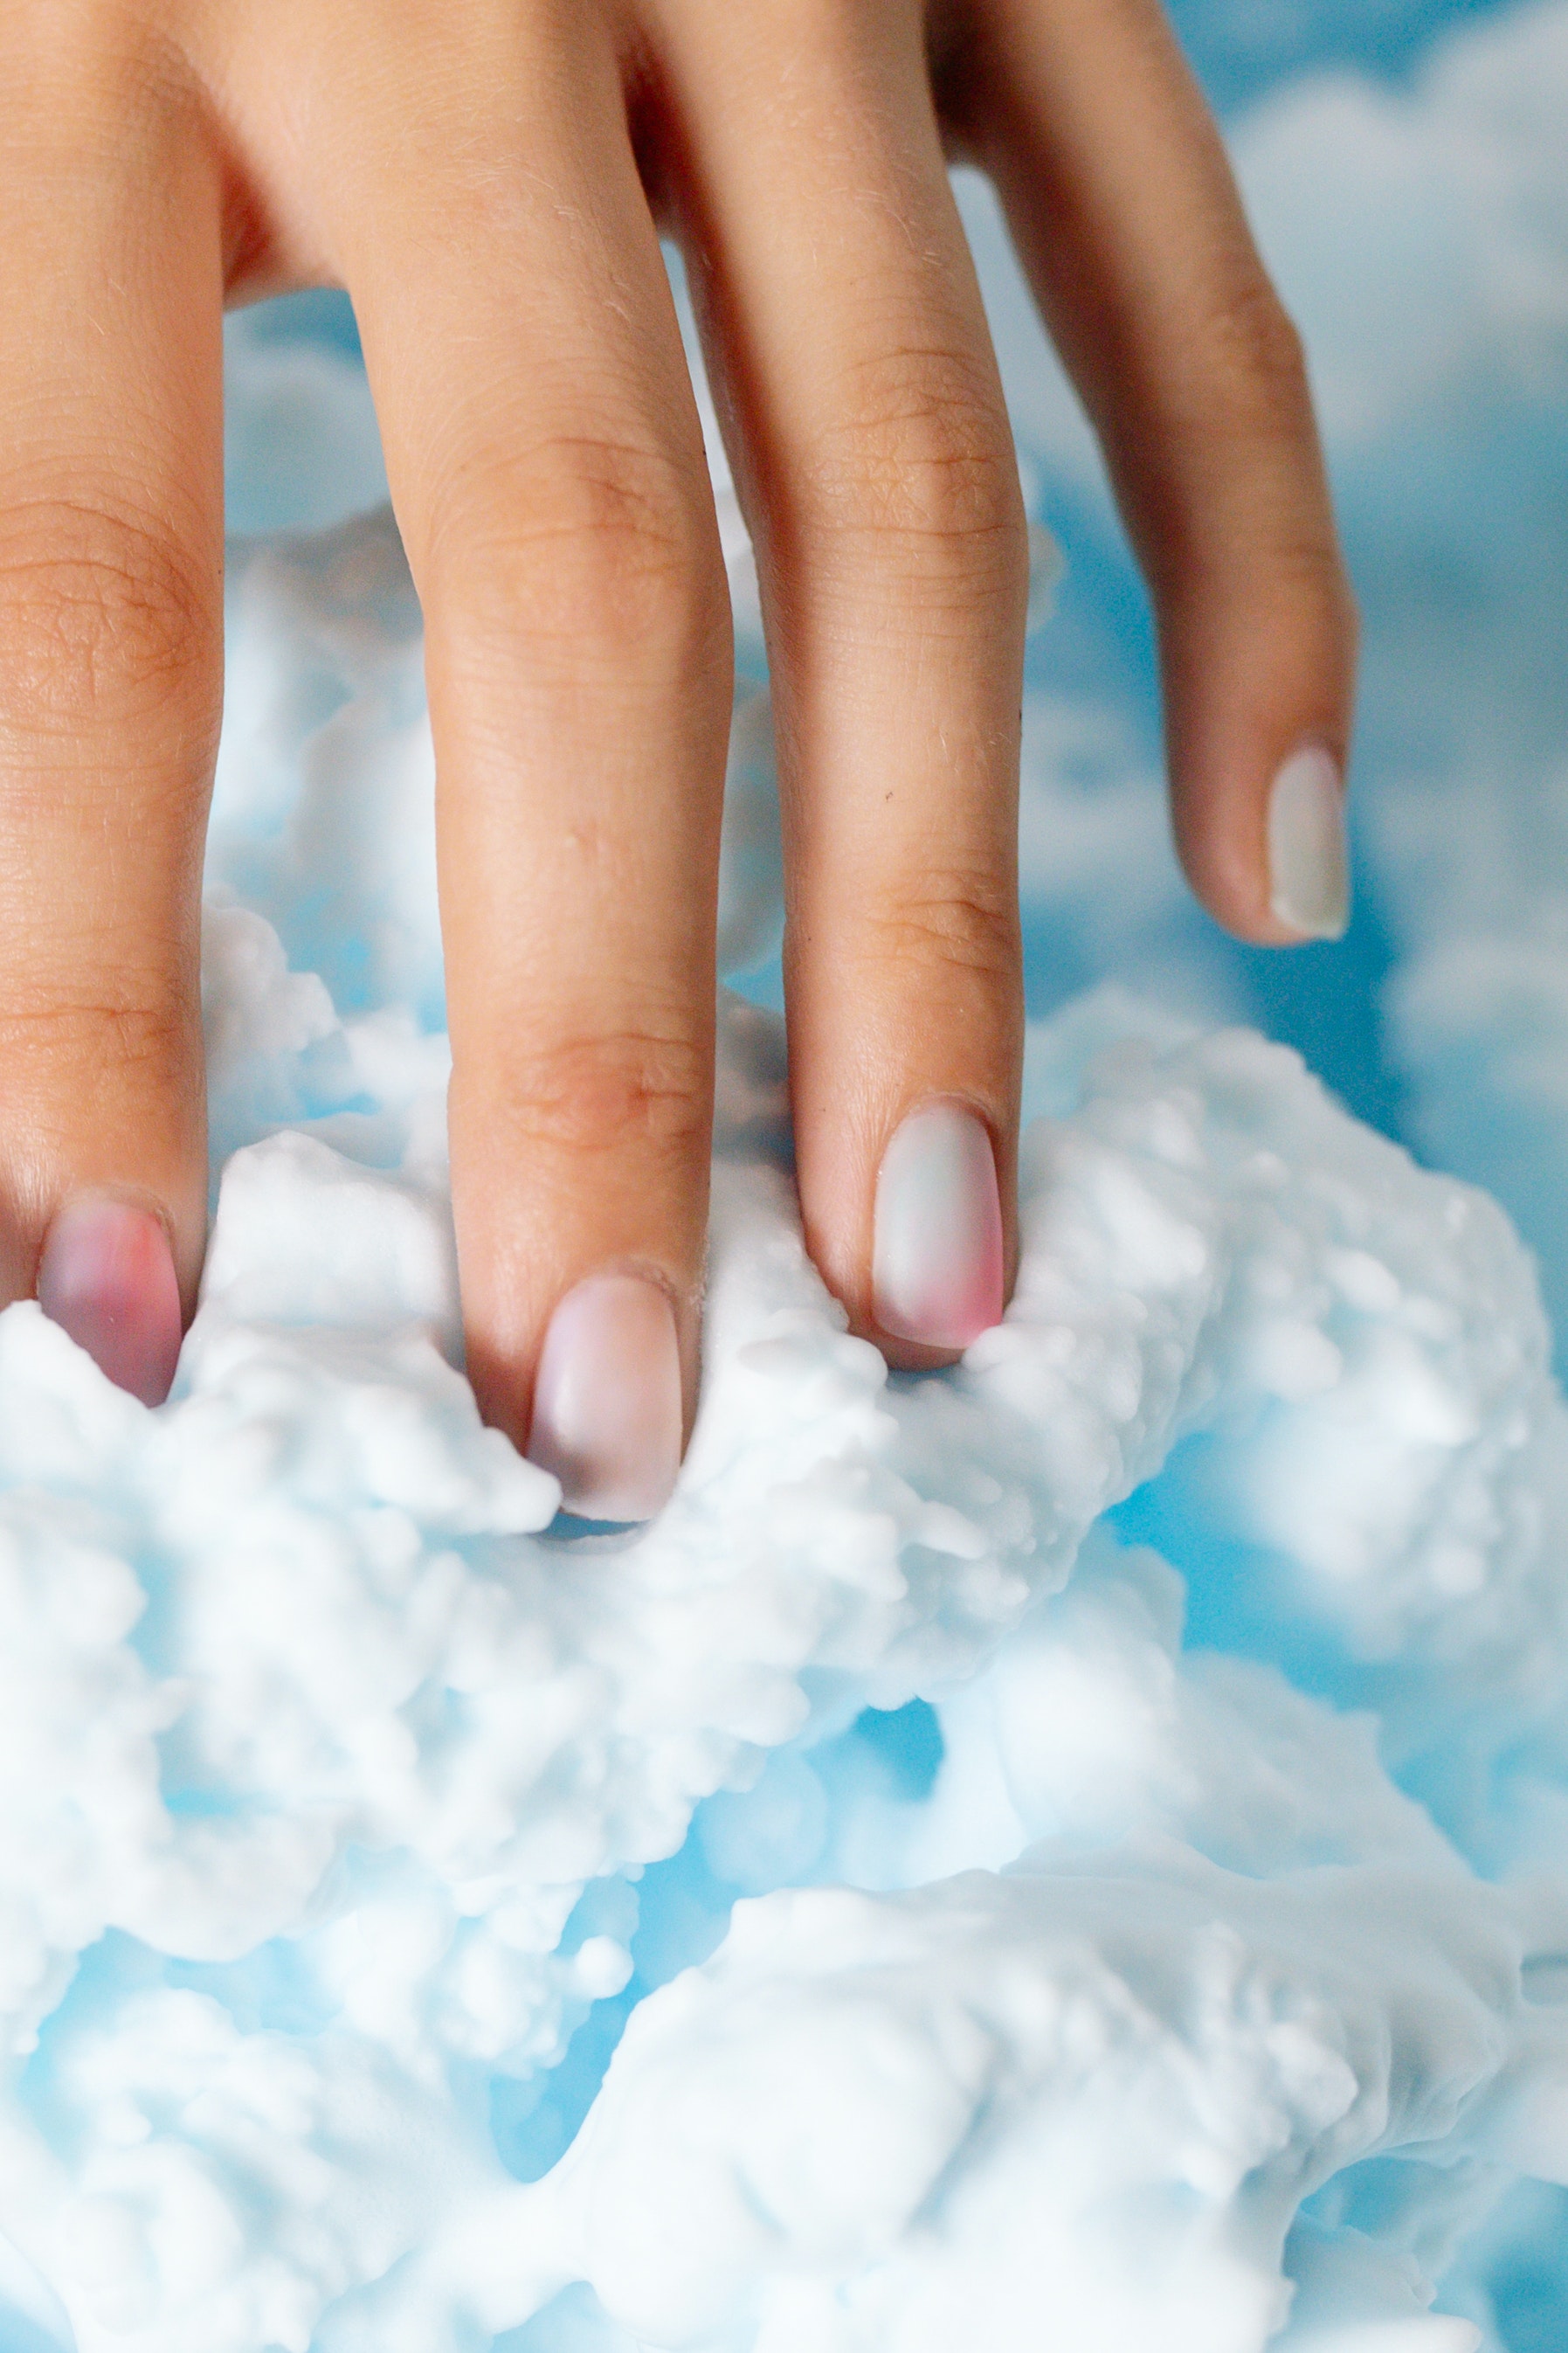 A  woman shows off her clean nails. | Source: Pexels